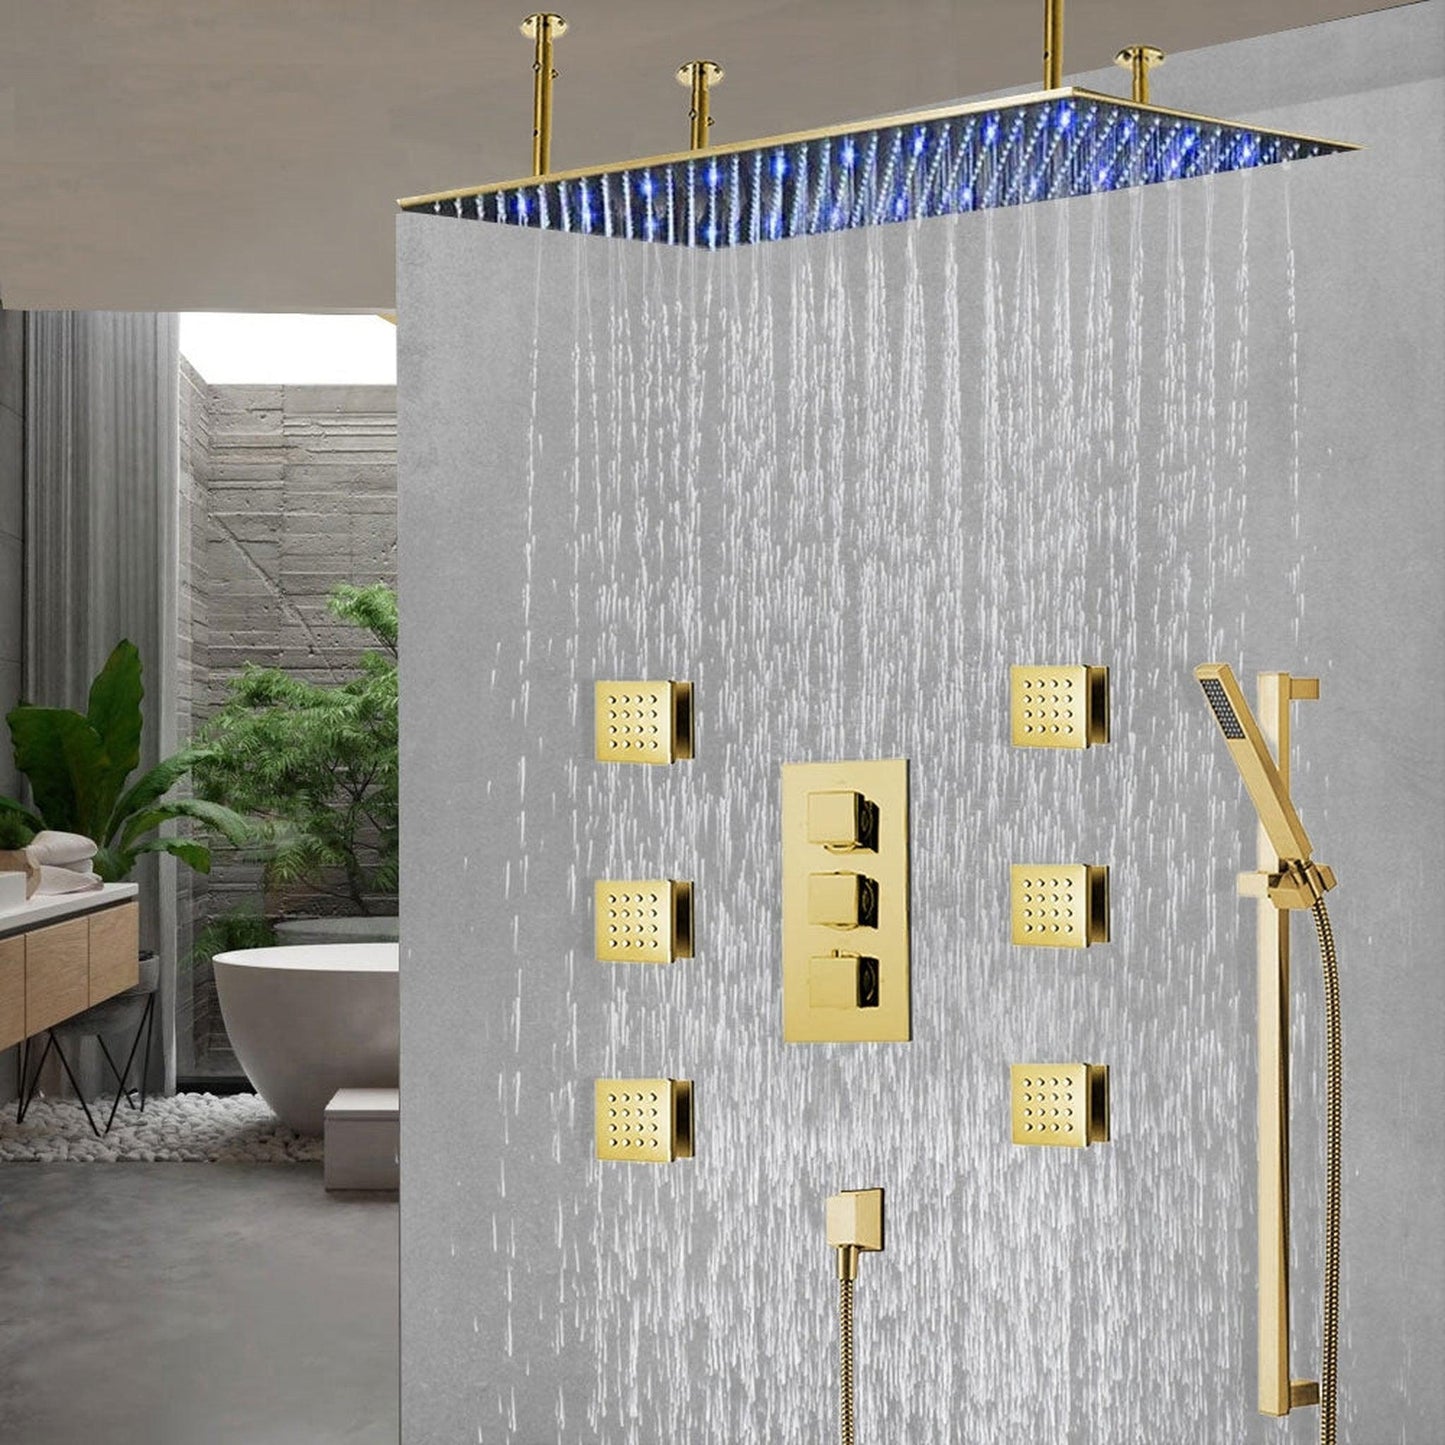 Fontana Diadema Creative Luxury Large Brushed Gold Rectangular Ceiling Mounted LED Solid Brass Shower Head Rain Shower System With 6-Jet Body Sprays and Hand Shower